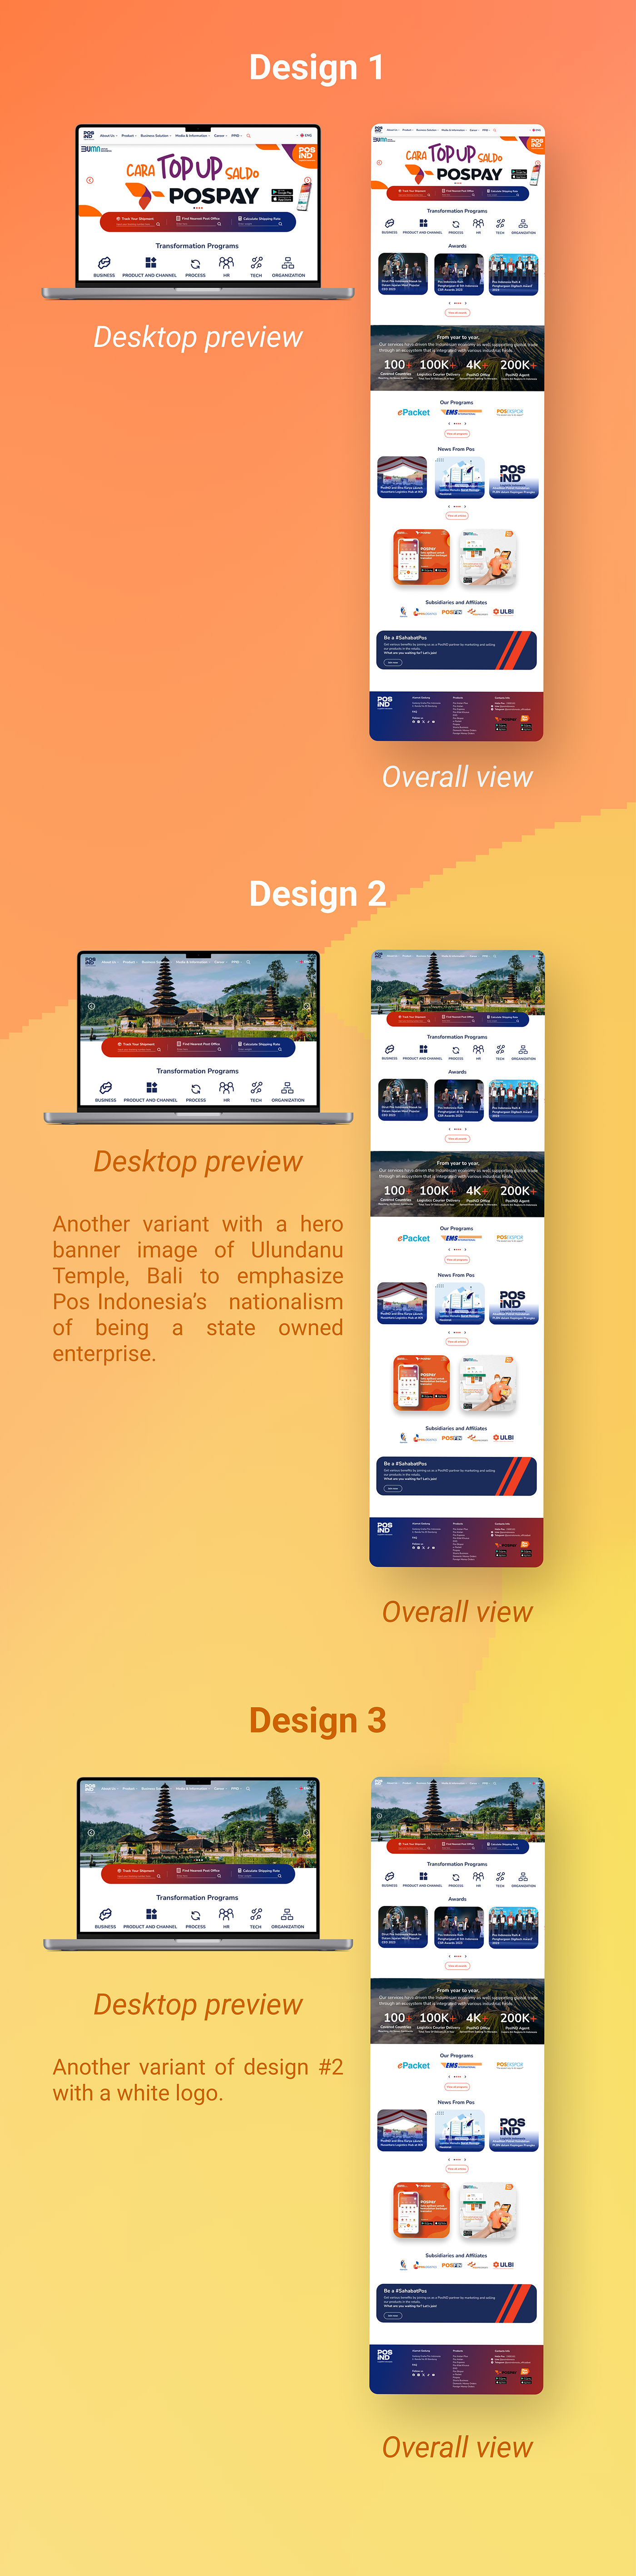 jitter animated Web Design  homepage redesign revamp UI UX design landing page Pos Indonesia